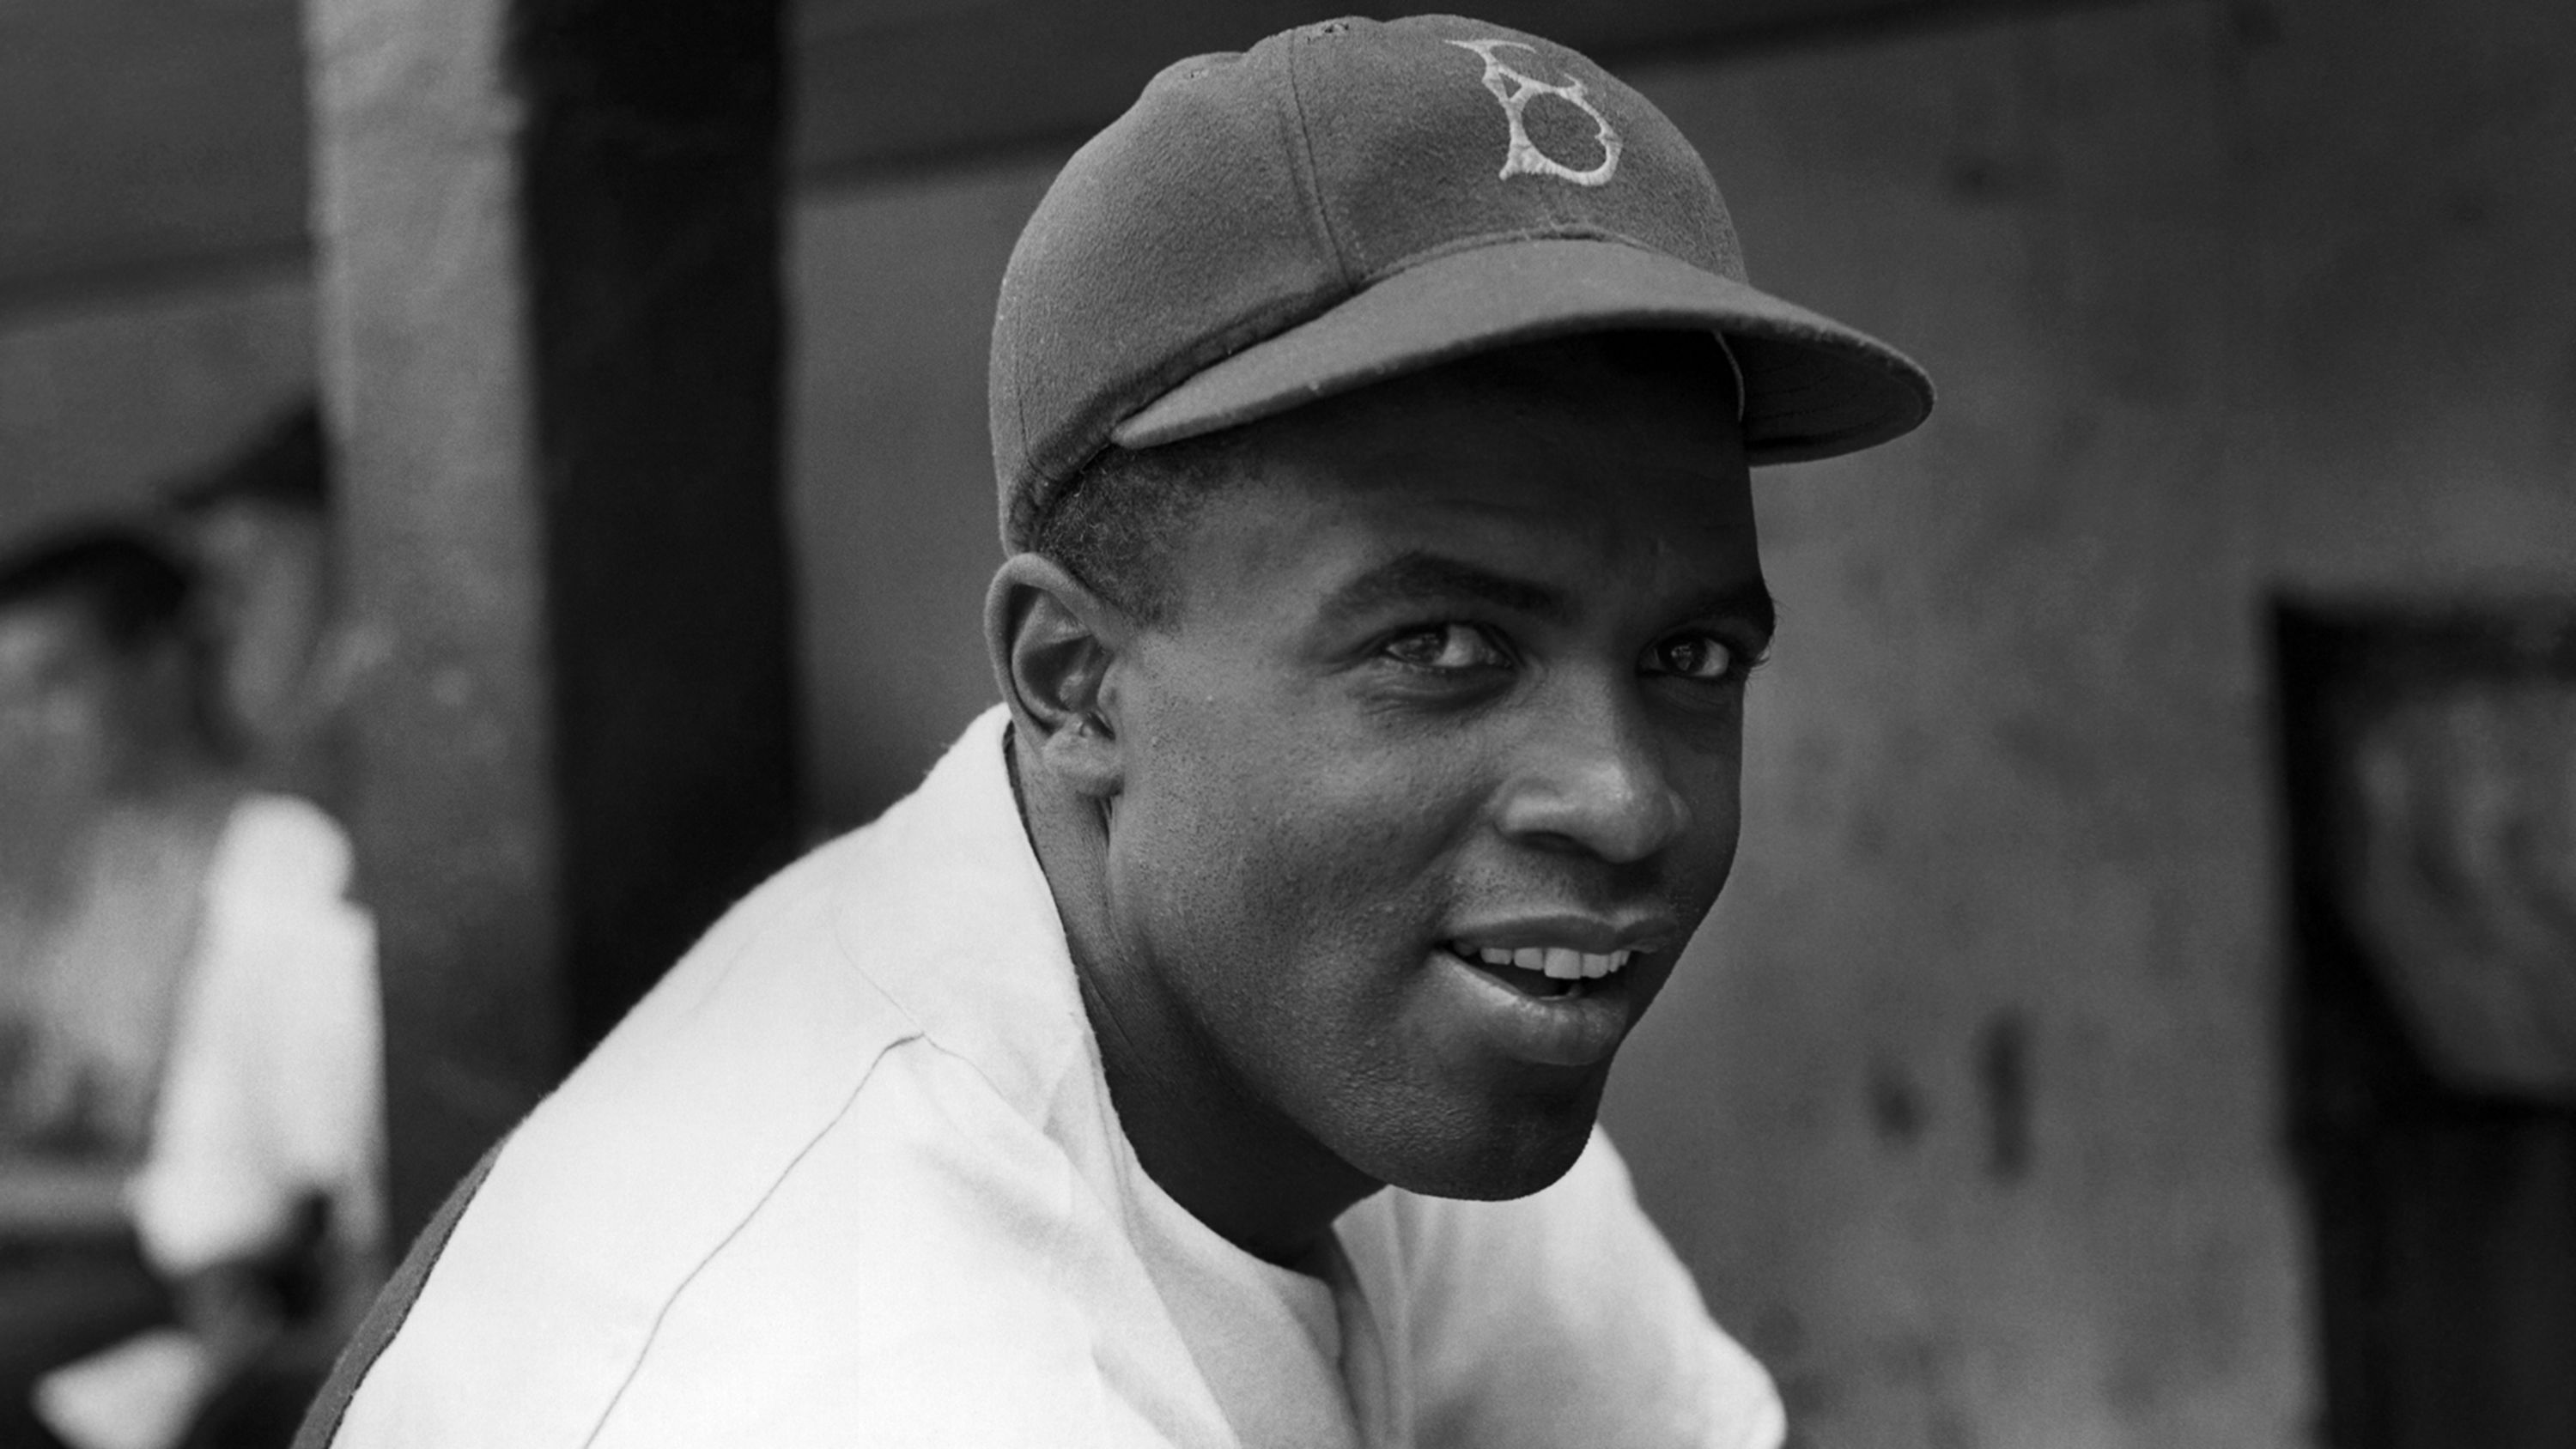 Meet THE Kid In THE Jackie Robinson Photo (Updated: Make That 'Six Photos')